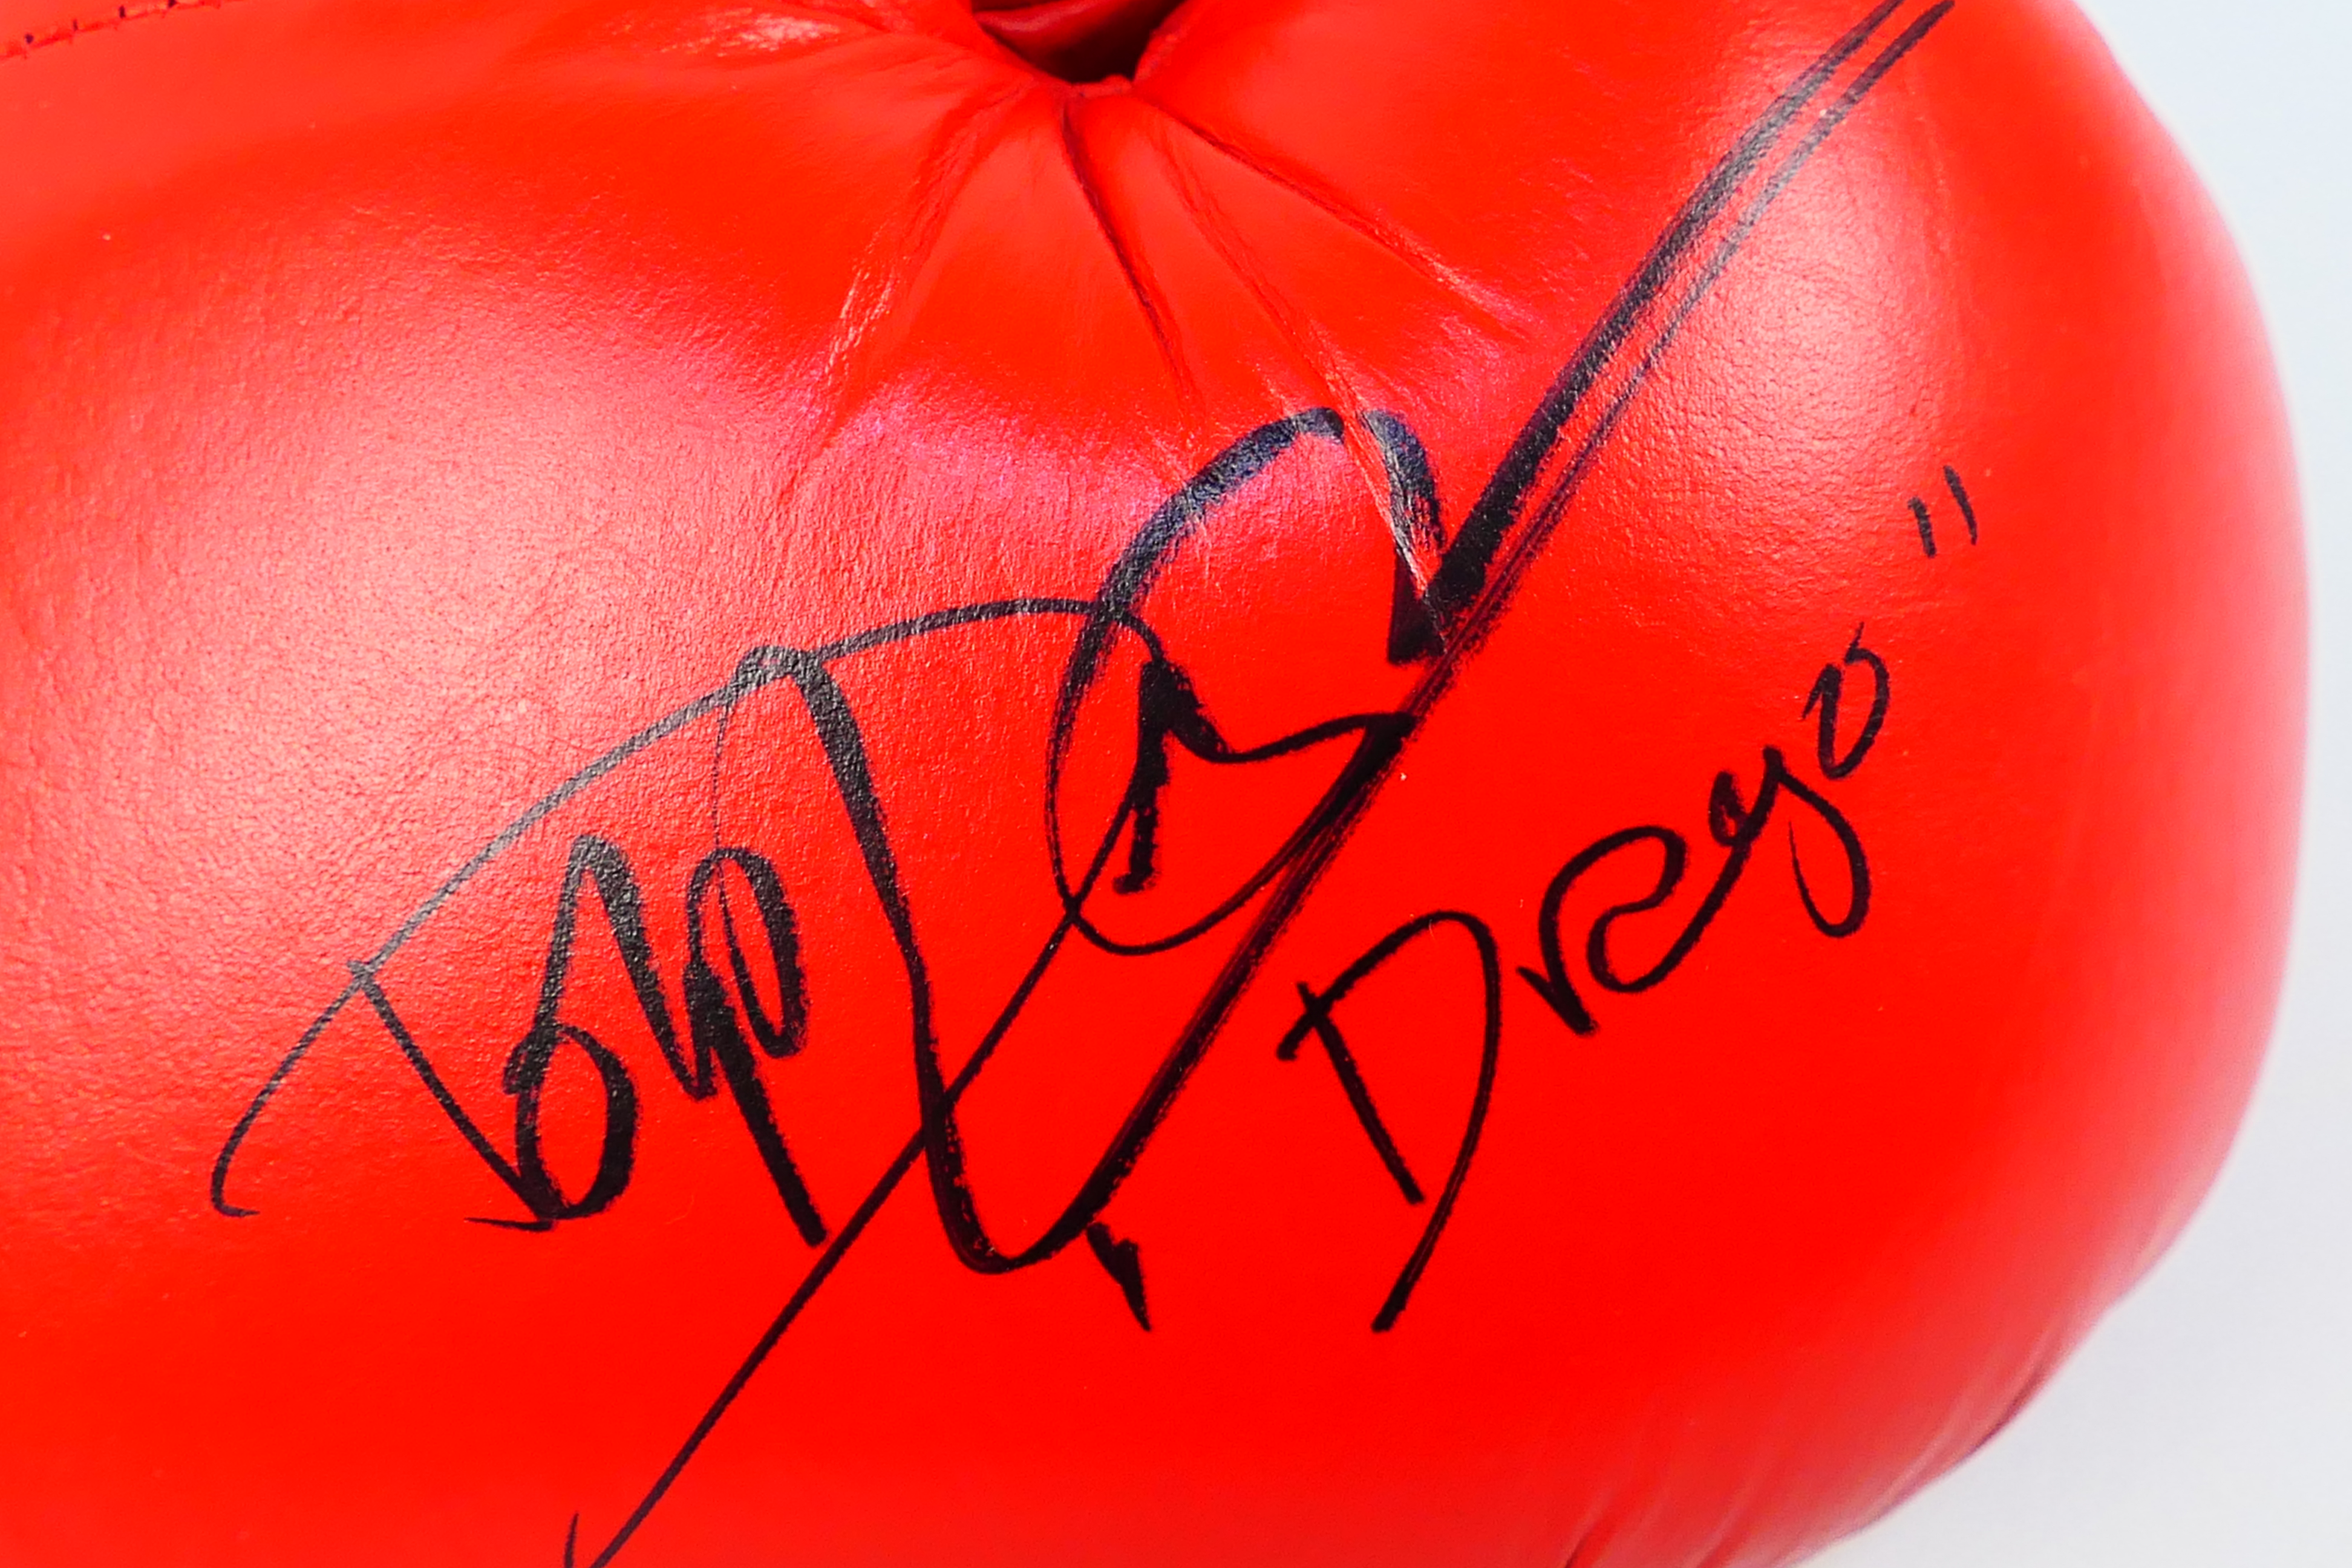 Rocky - A 10oz Everlast boxing glove signed by Dolph Lundgren, inscribed Drago below the signature, - Image 2 of 5